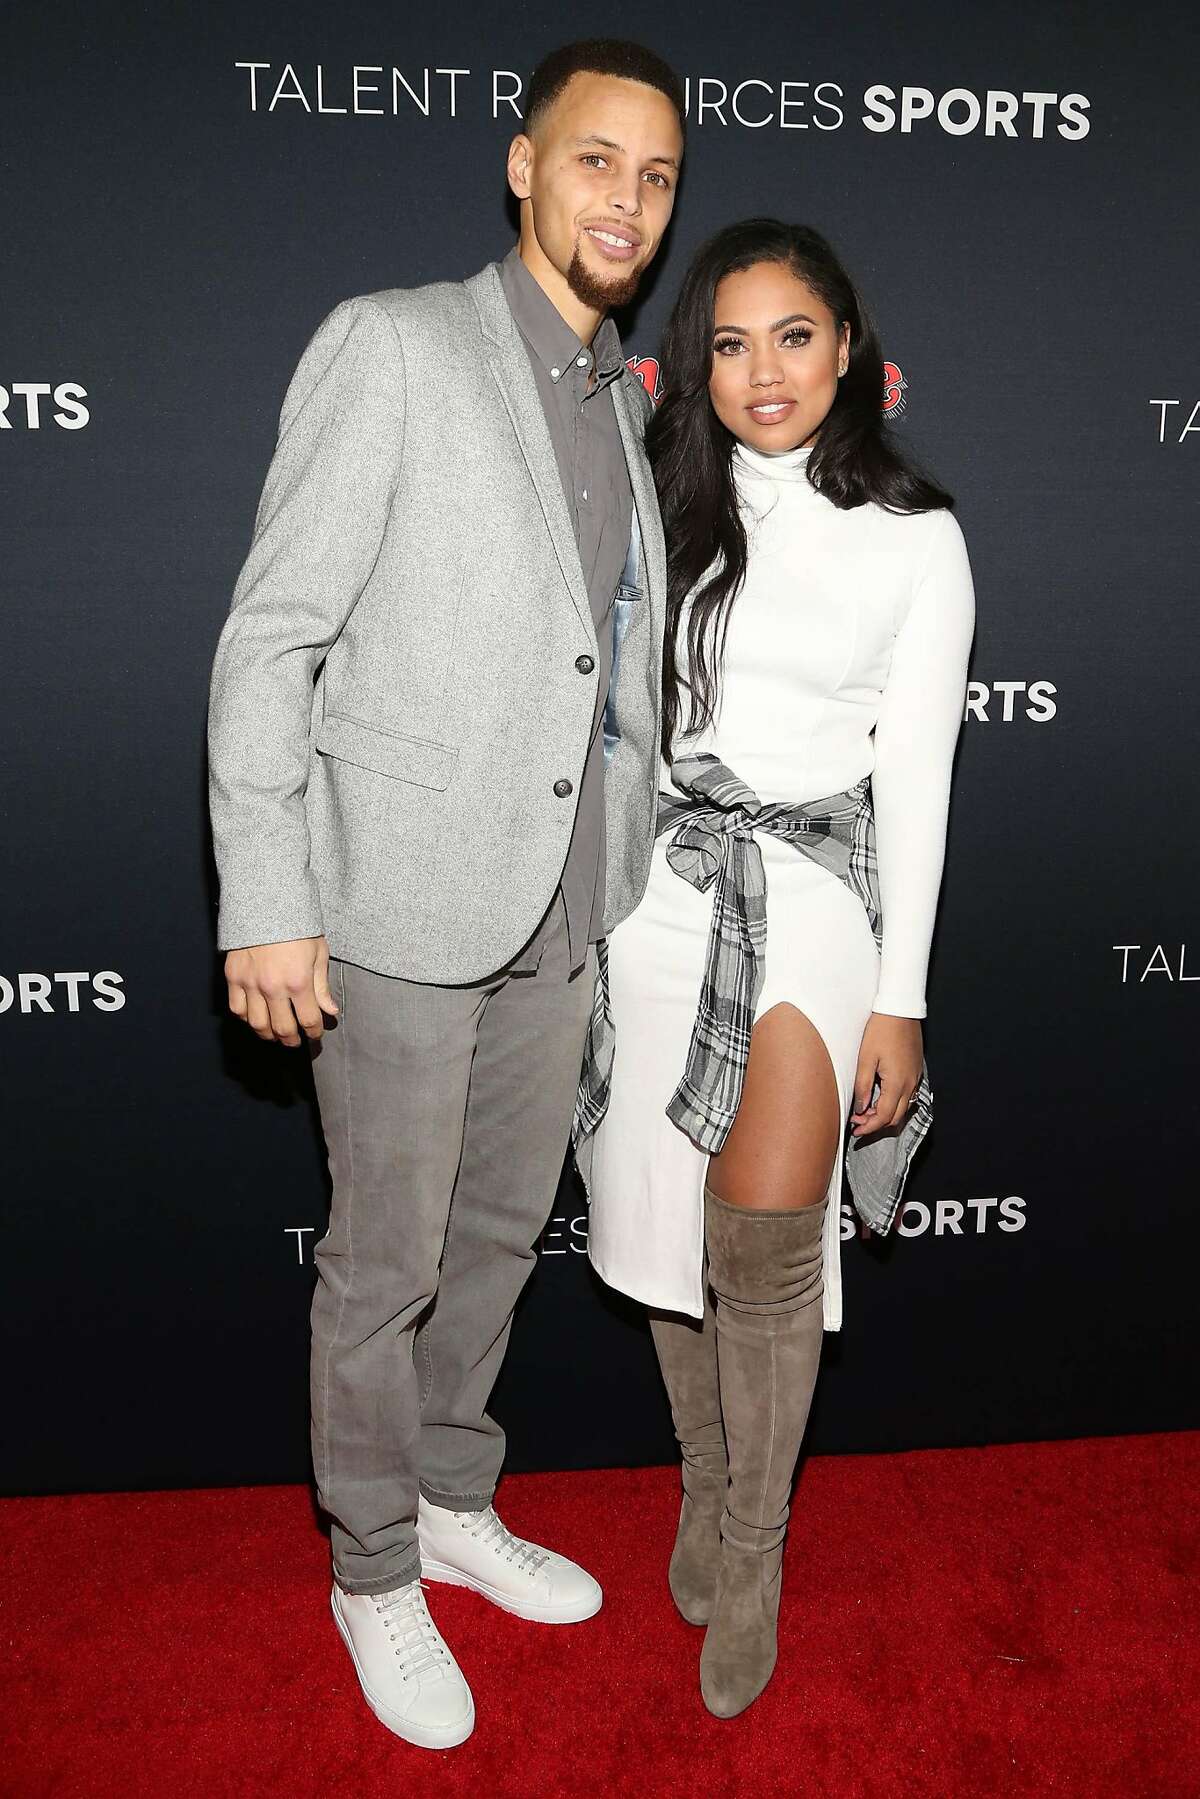 Stephen Curry and Ayesha Curry arrive at the Super Bowl 50 Rolling Stone Party at The Galleria at the San Francisco Design Center on Saturday, Feb. 6, 2016, in San Francisco. (Photo by Omar Vega/Invision/AP)